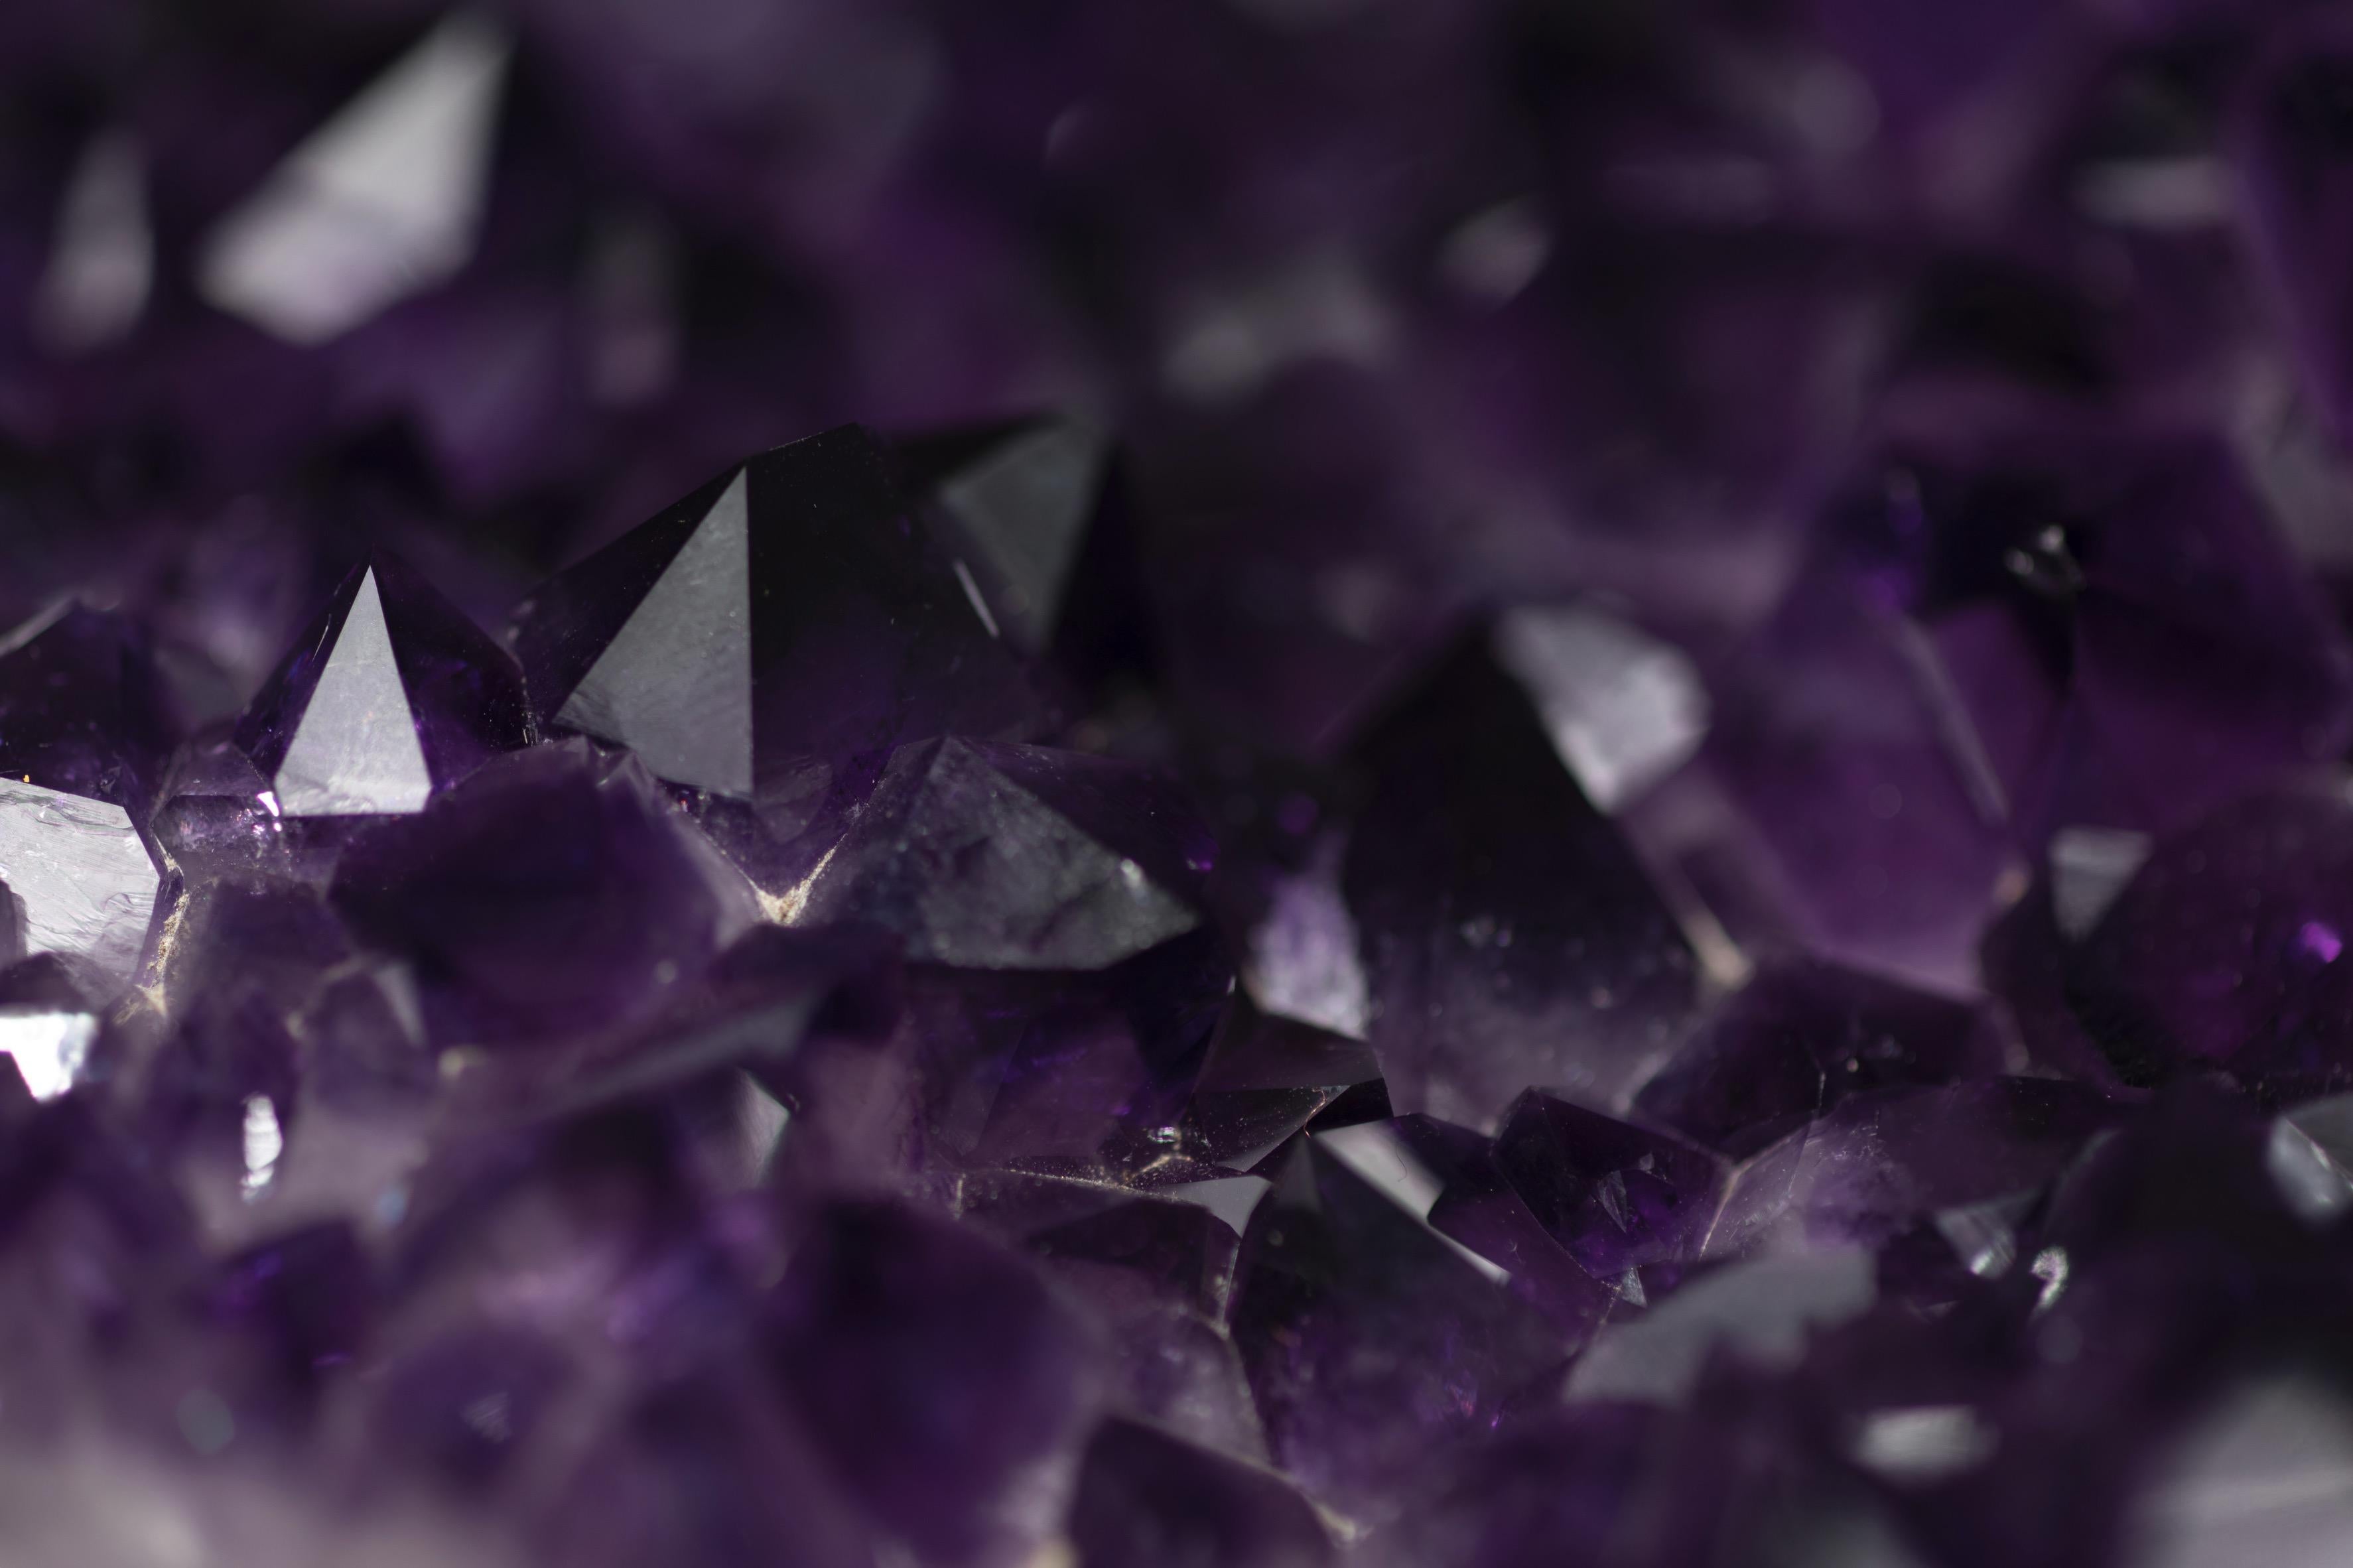 Given its breath-taking stature, one can see that this amethyst cluster was freed from an especially large geode and with amethyst of exceptional quality within. 

The color and size of the crystals' peaks causes the light to be refracted